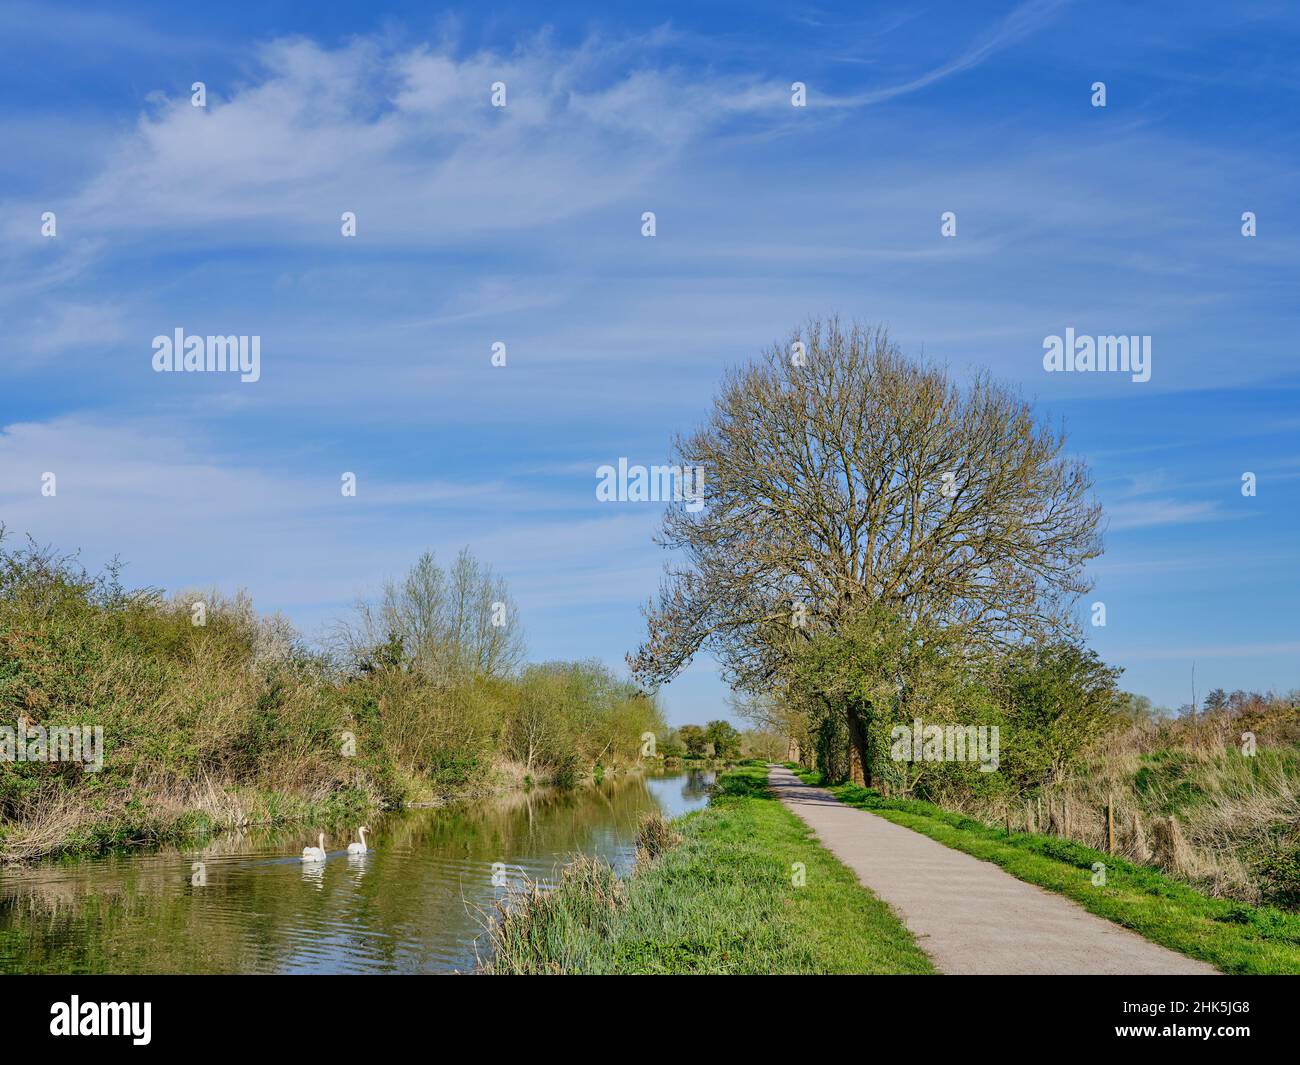 Two Swans travelling along The Kennet And Avon Canal in West Berkshire, England, UK on a sunny day in April including an empty toe path Stock Photo